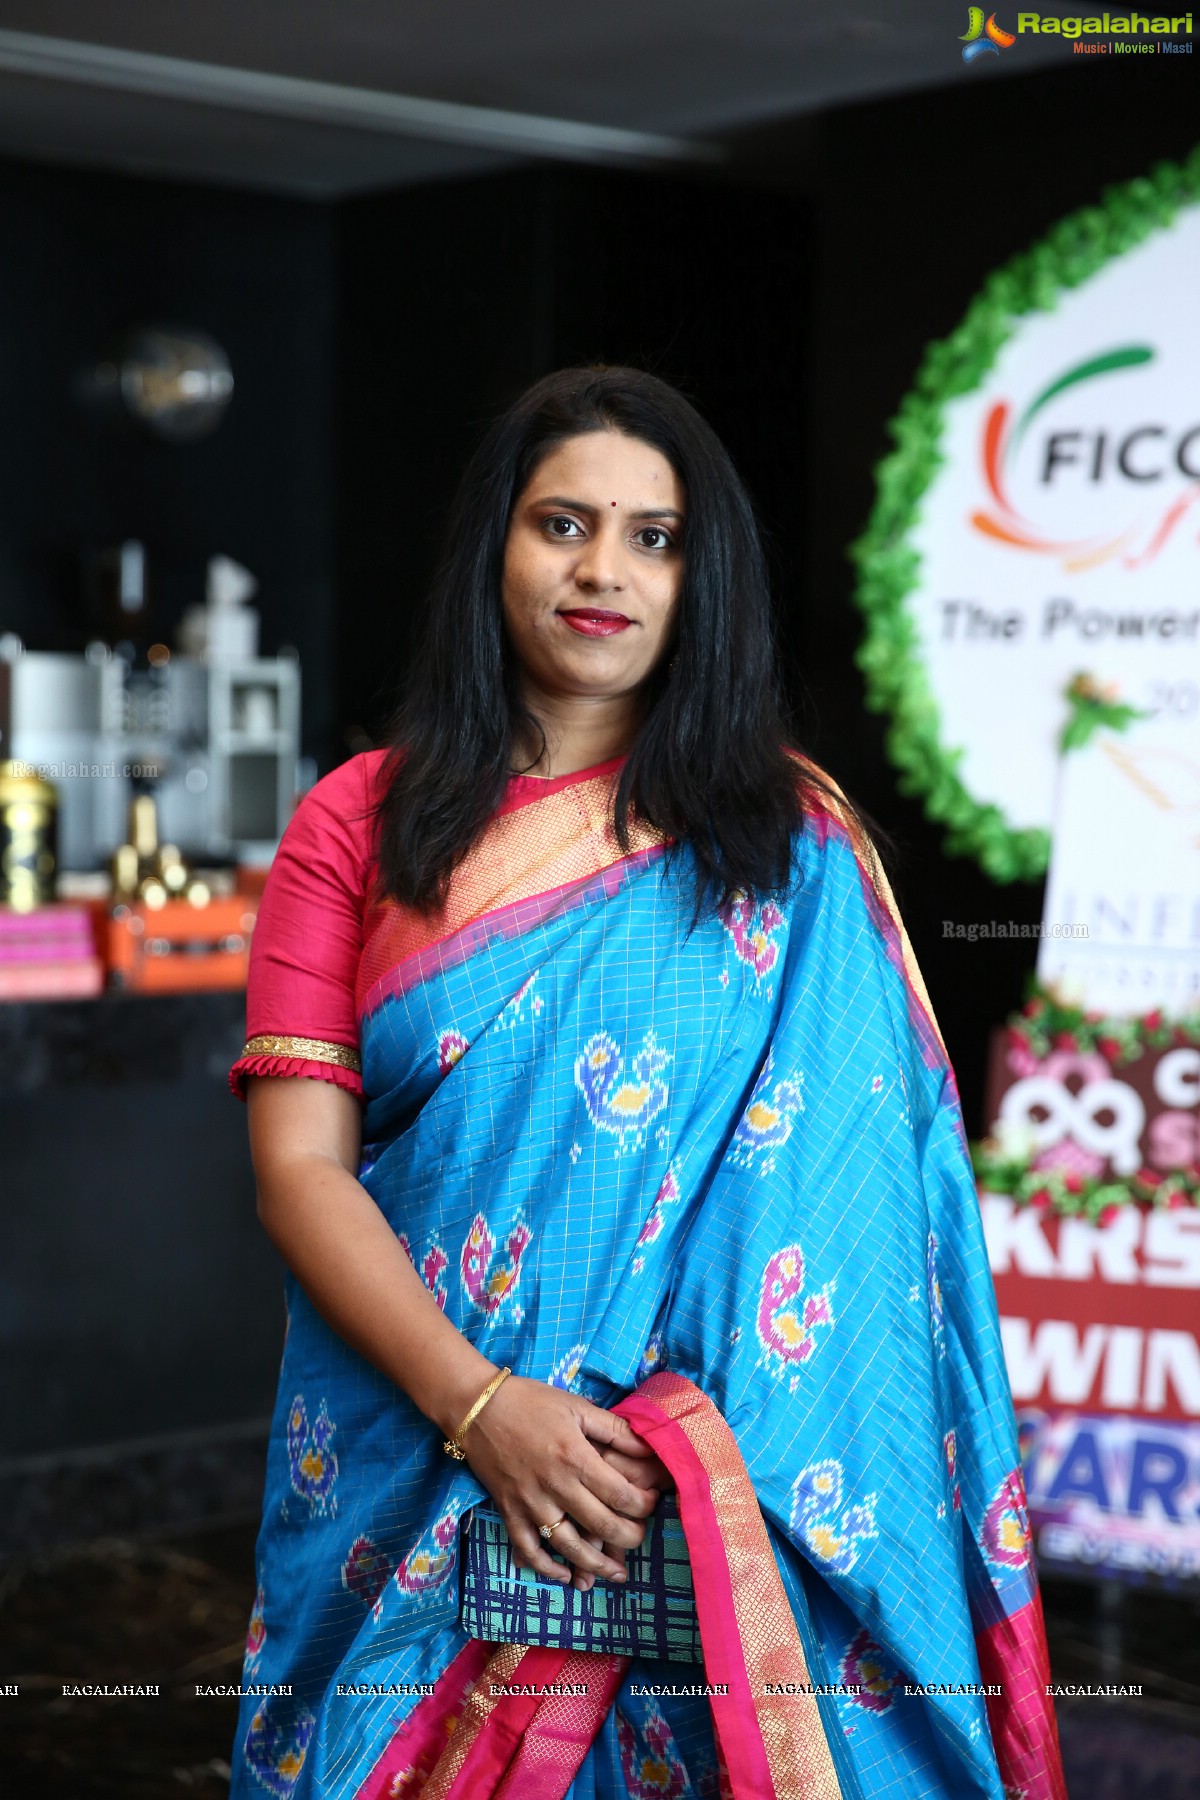 New Teams of FLO & YFLO Takes Over at Park Hyatt, Hyderabad. Tabu graces the Change of Guard